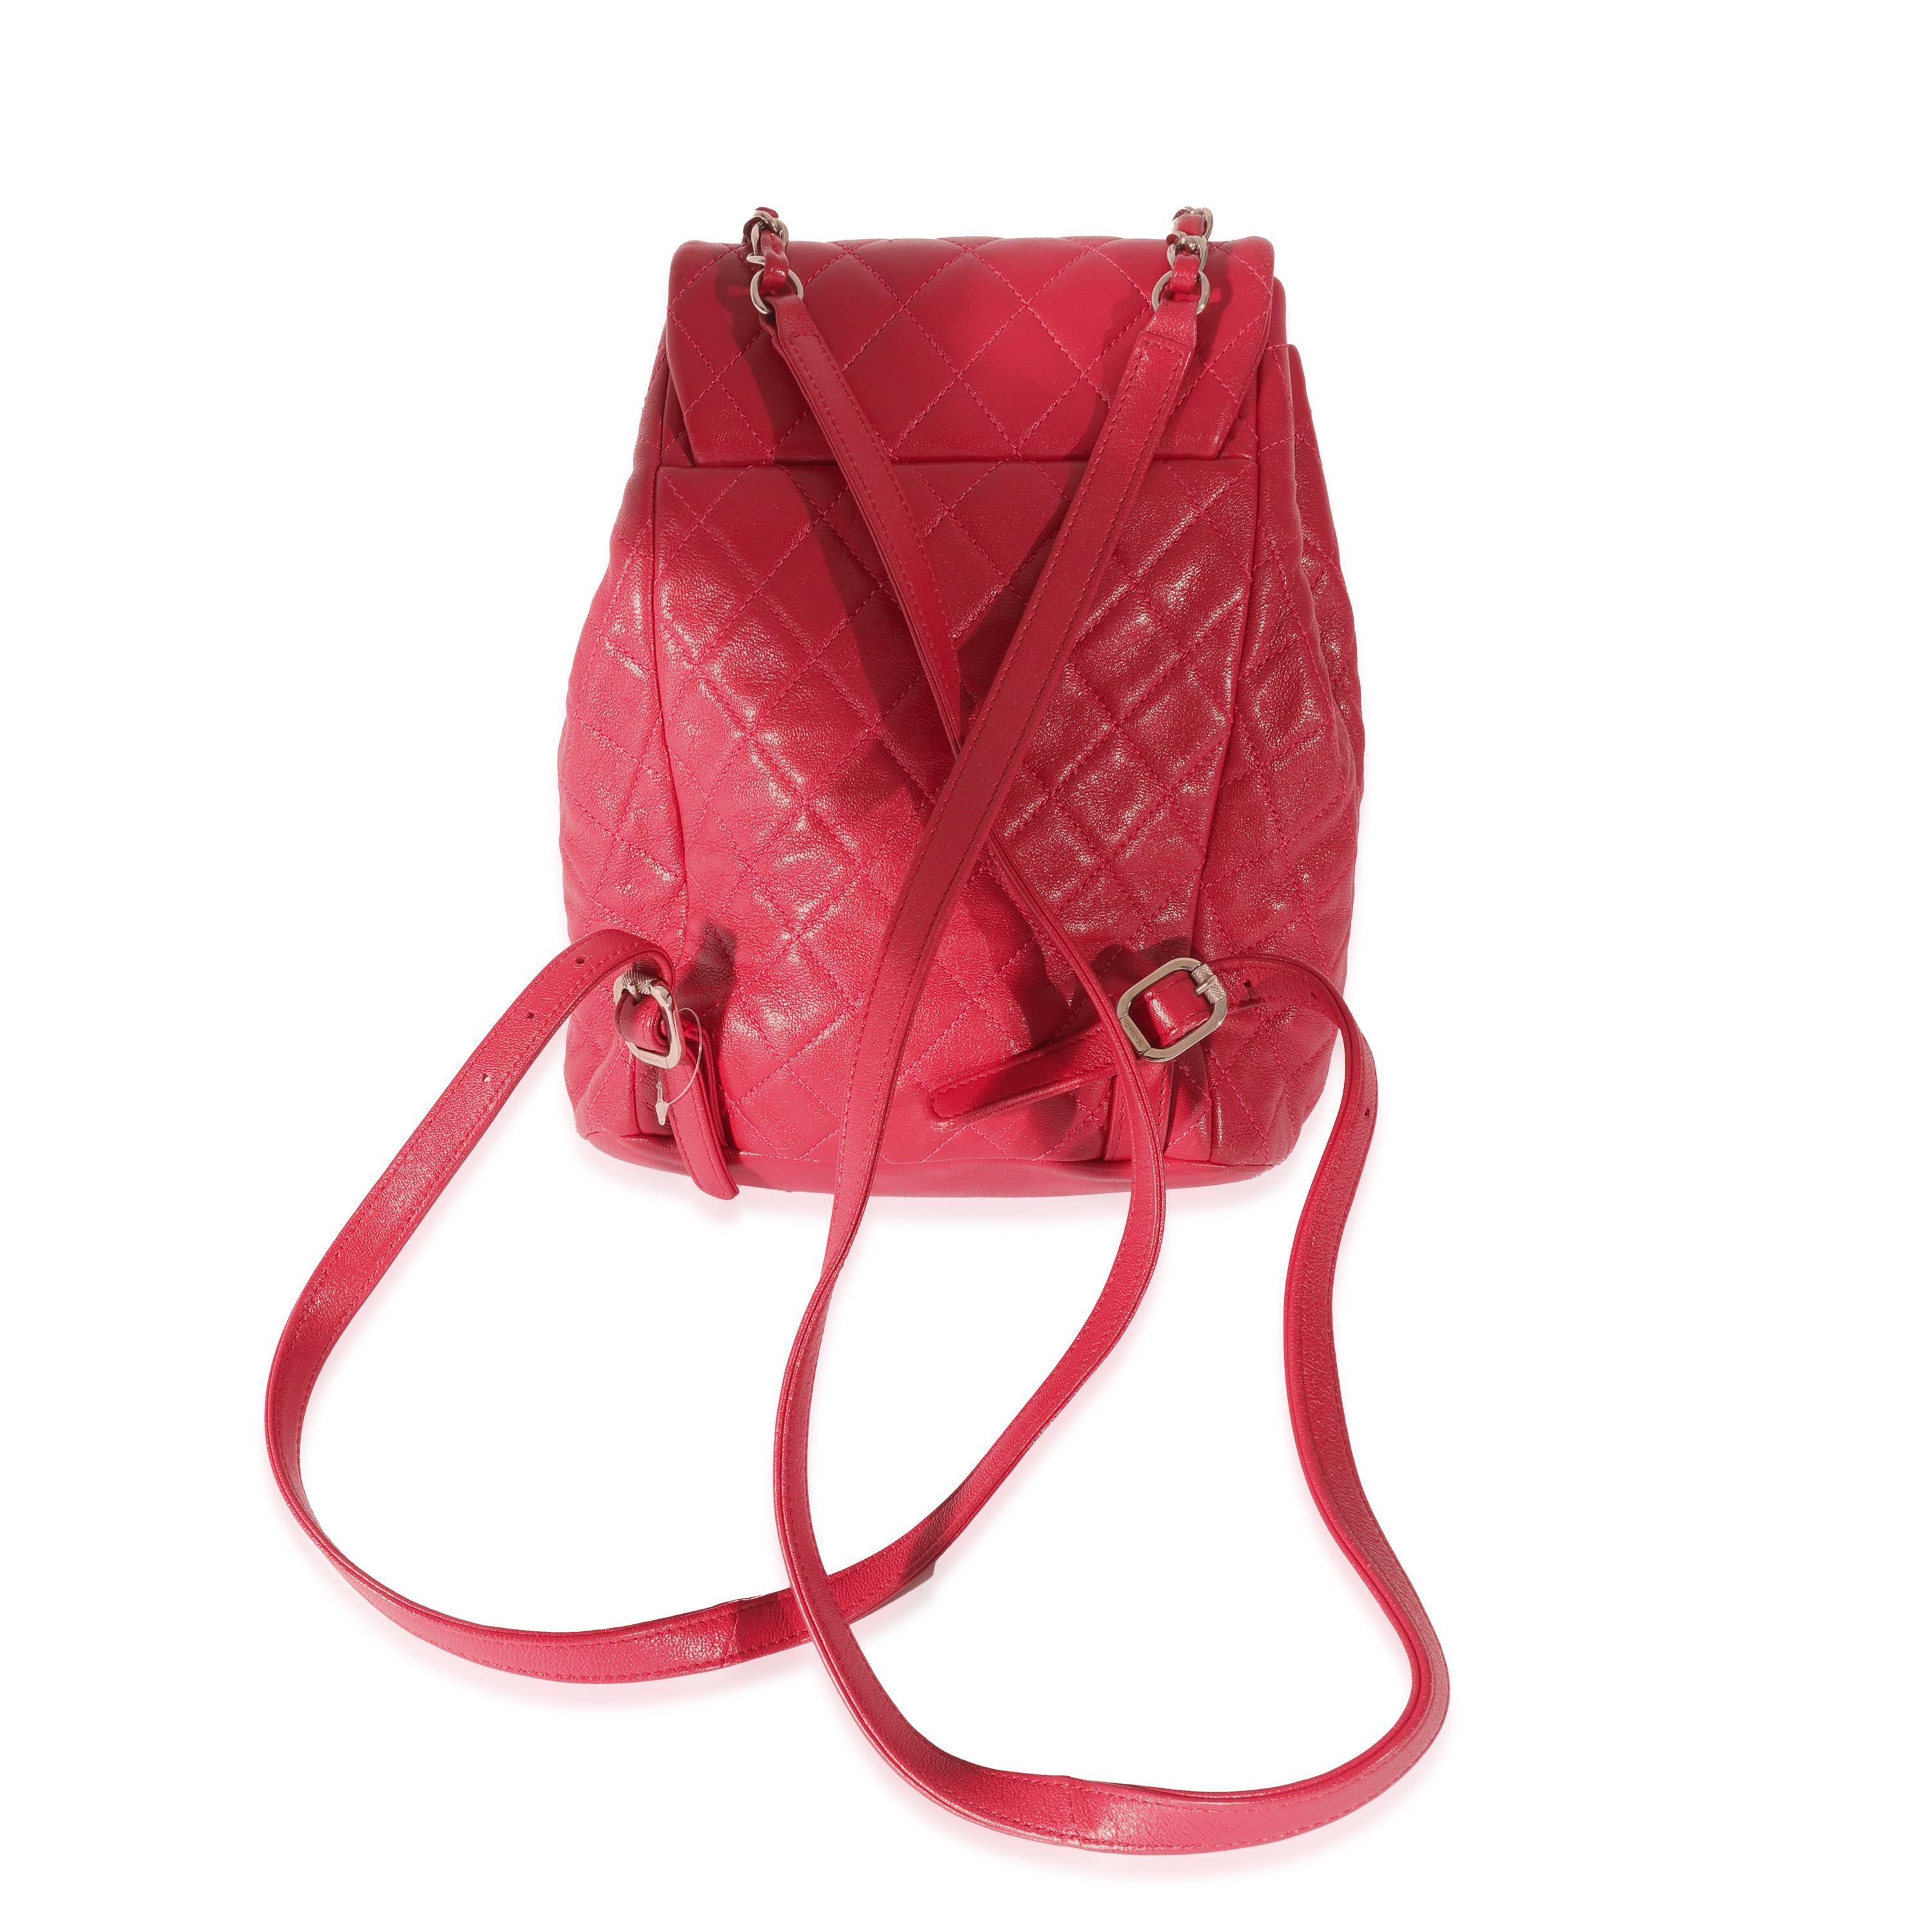 Listing Title: Chanel Red Quilted Calfskin Medium Covered CC Drawstring Backpack
SKU: 128080
Condition: Pre-owned 
Handbag Condition: Very Good
Condition Comments: Very Good Condition. Plastic at some hardware. Exterior scuffing at straps and